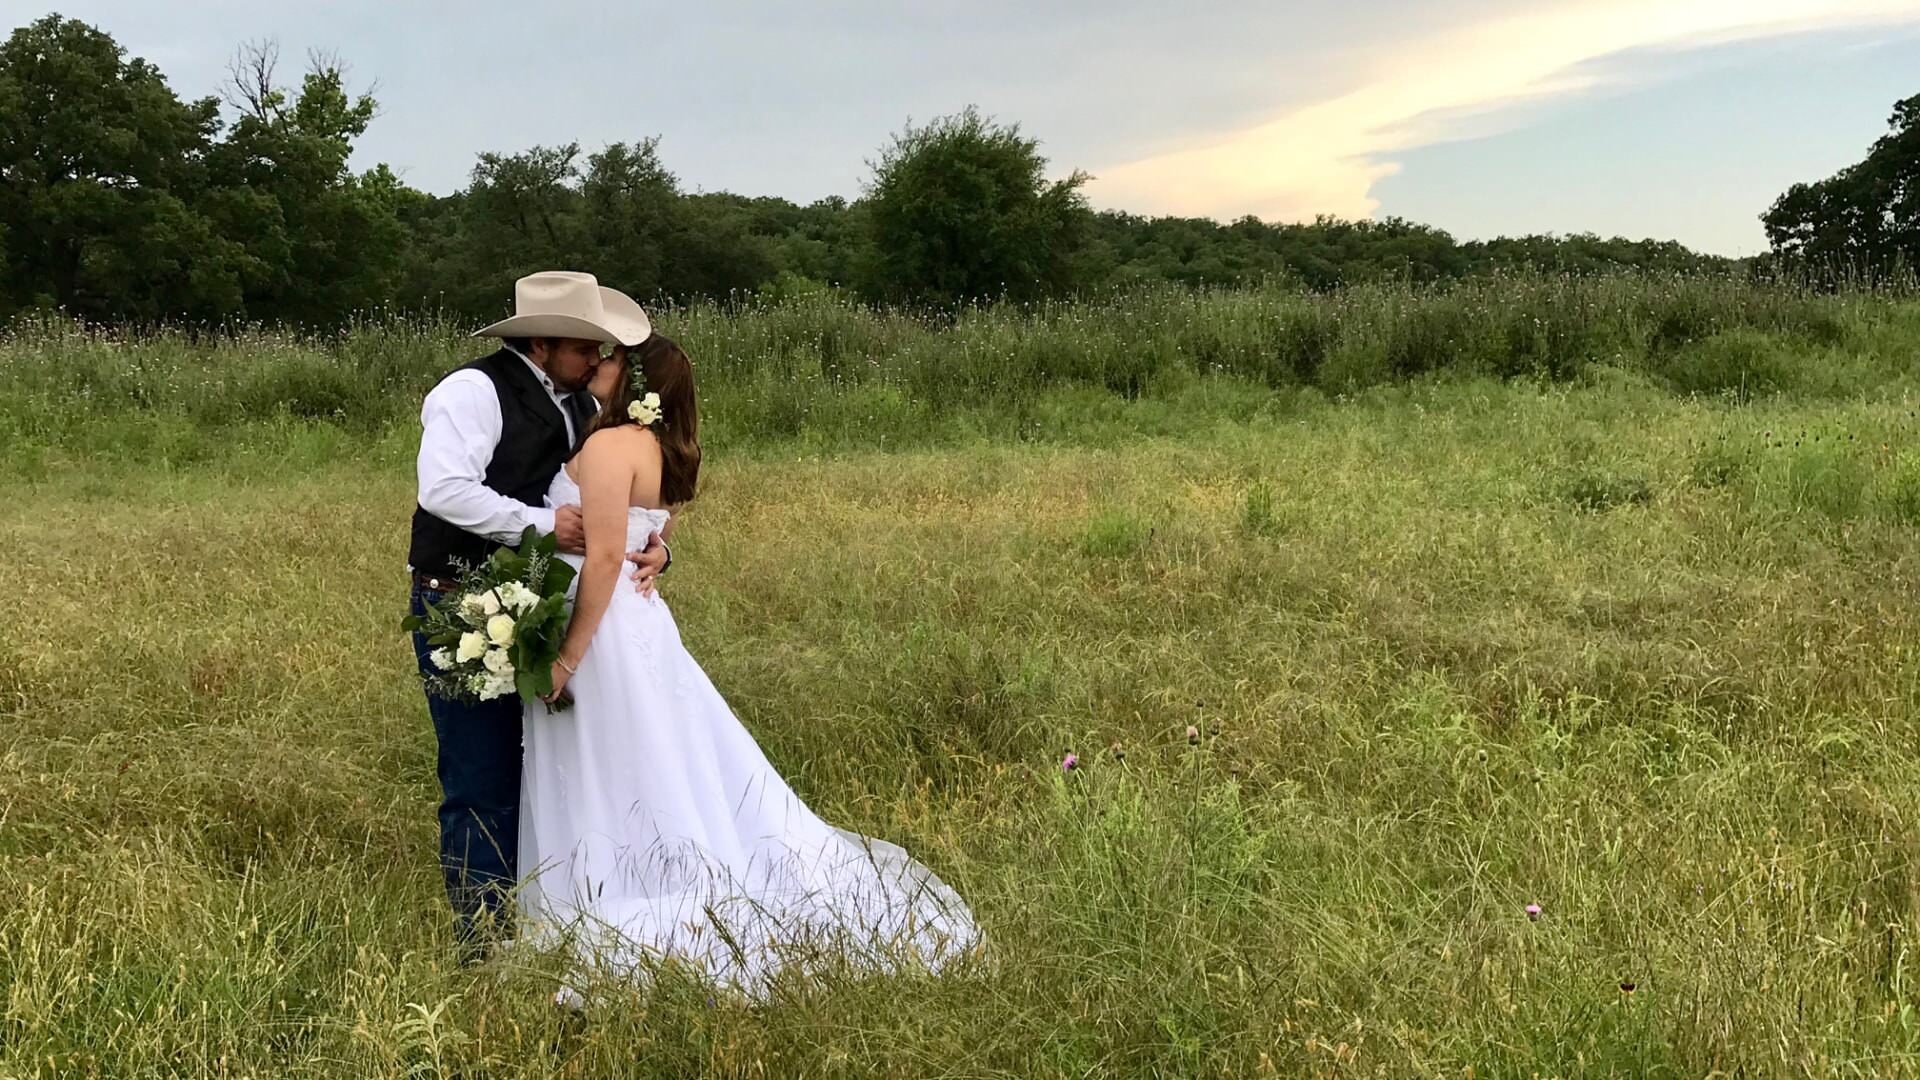 Groom holding and kissing bride while standing in field of grass with trees in the background